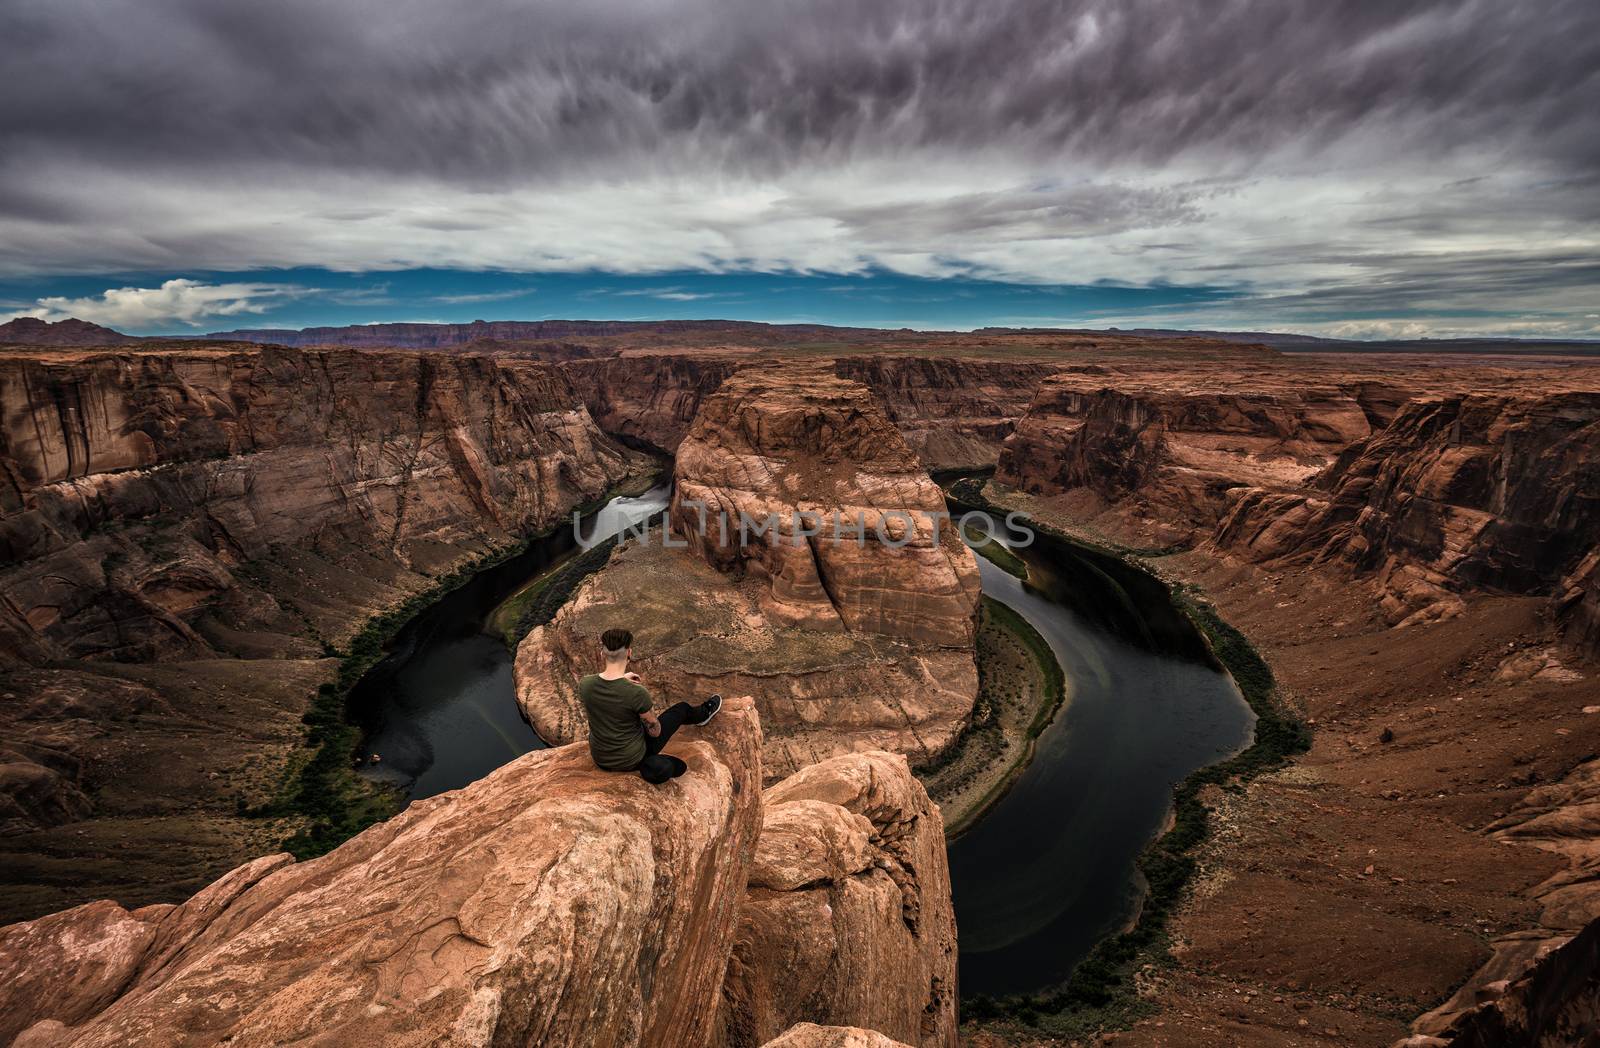 Horseshoe Bend and a hiker at the edge by nickfox